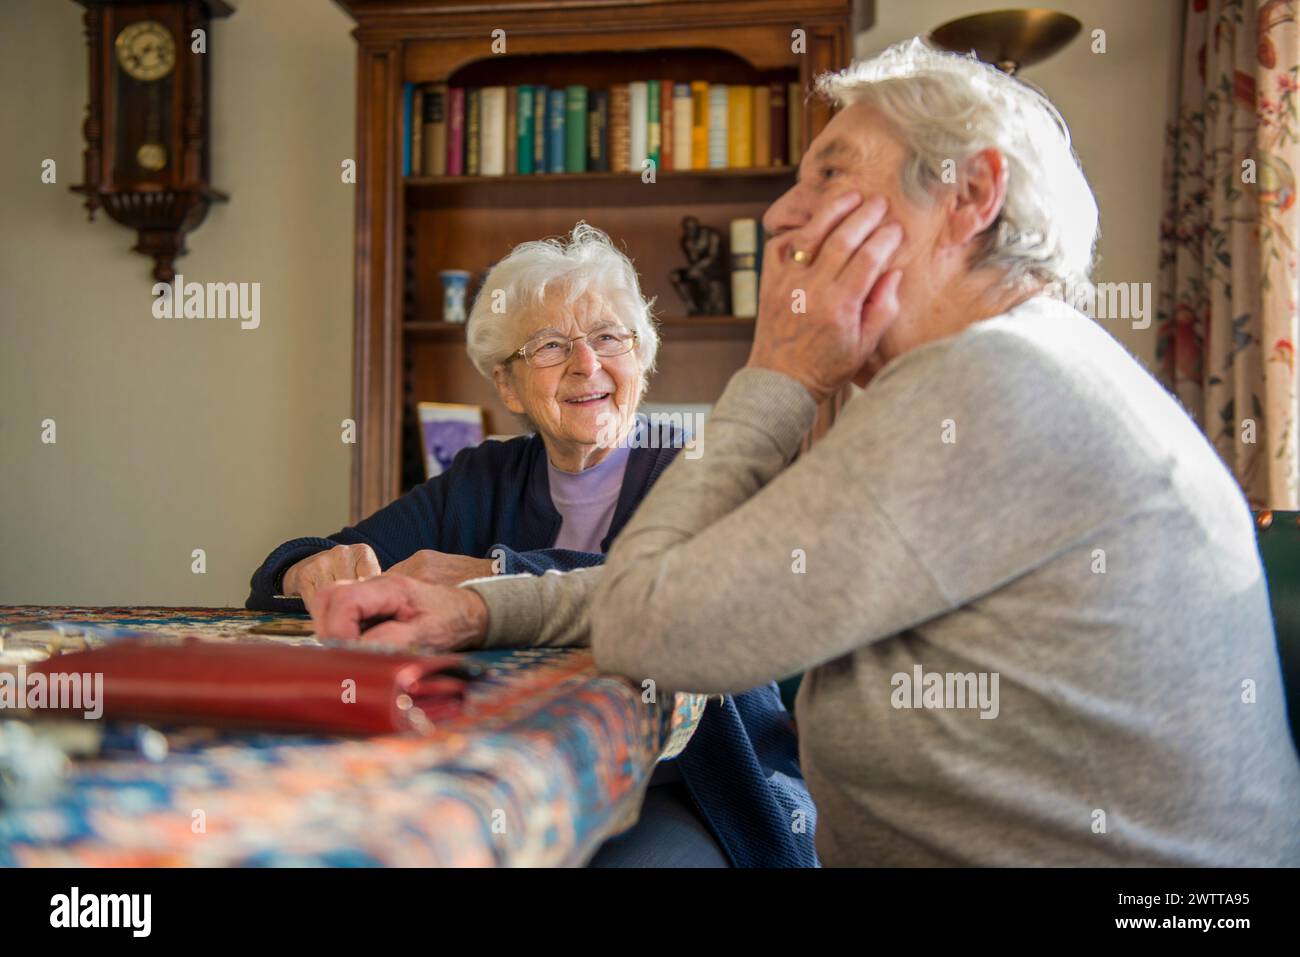 Two elderly women sharing a joyful moment together at home Stock Photo